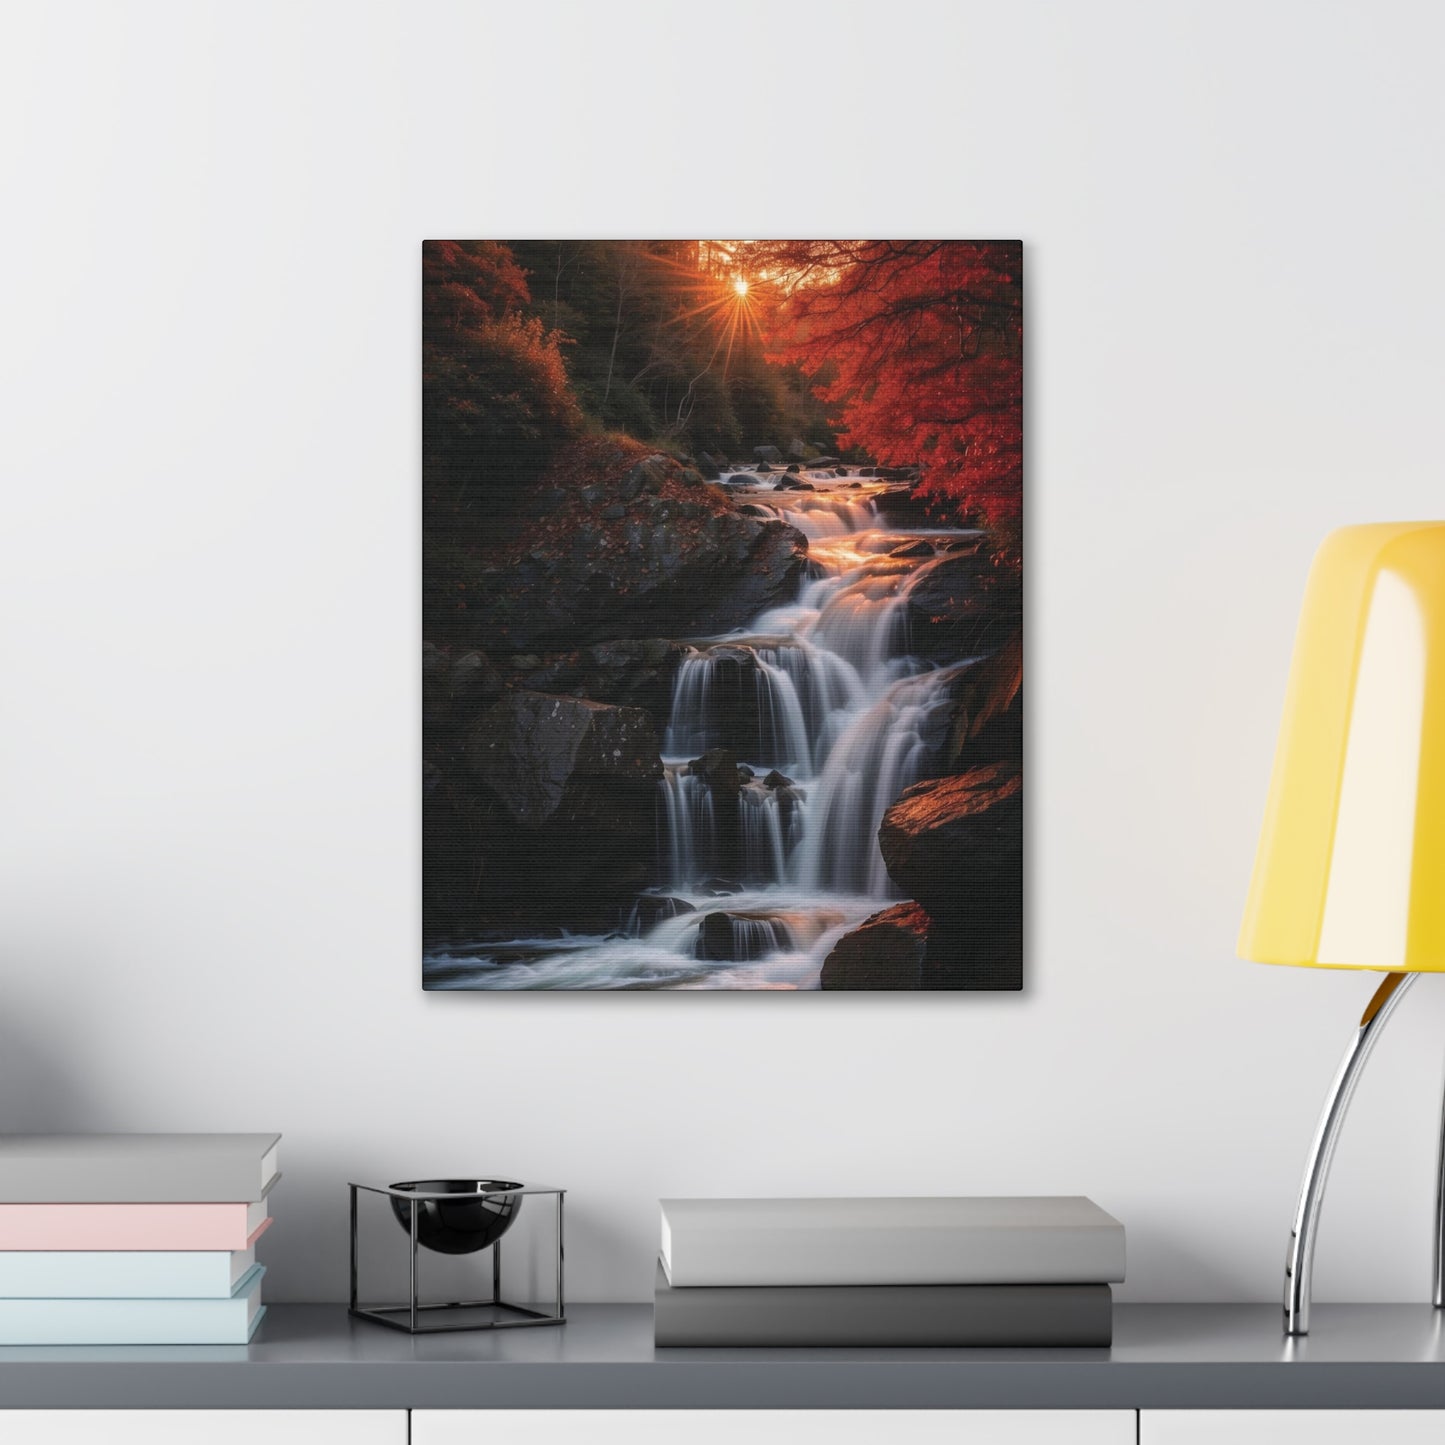 Sunrise Over the Waterfall: Canvas Gallery Wraps